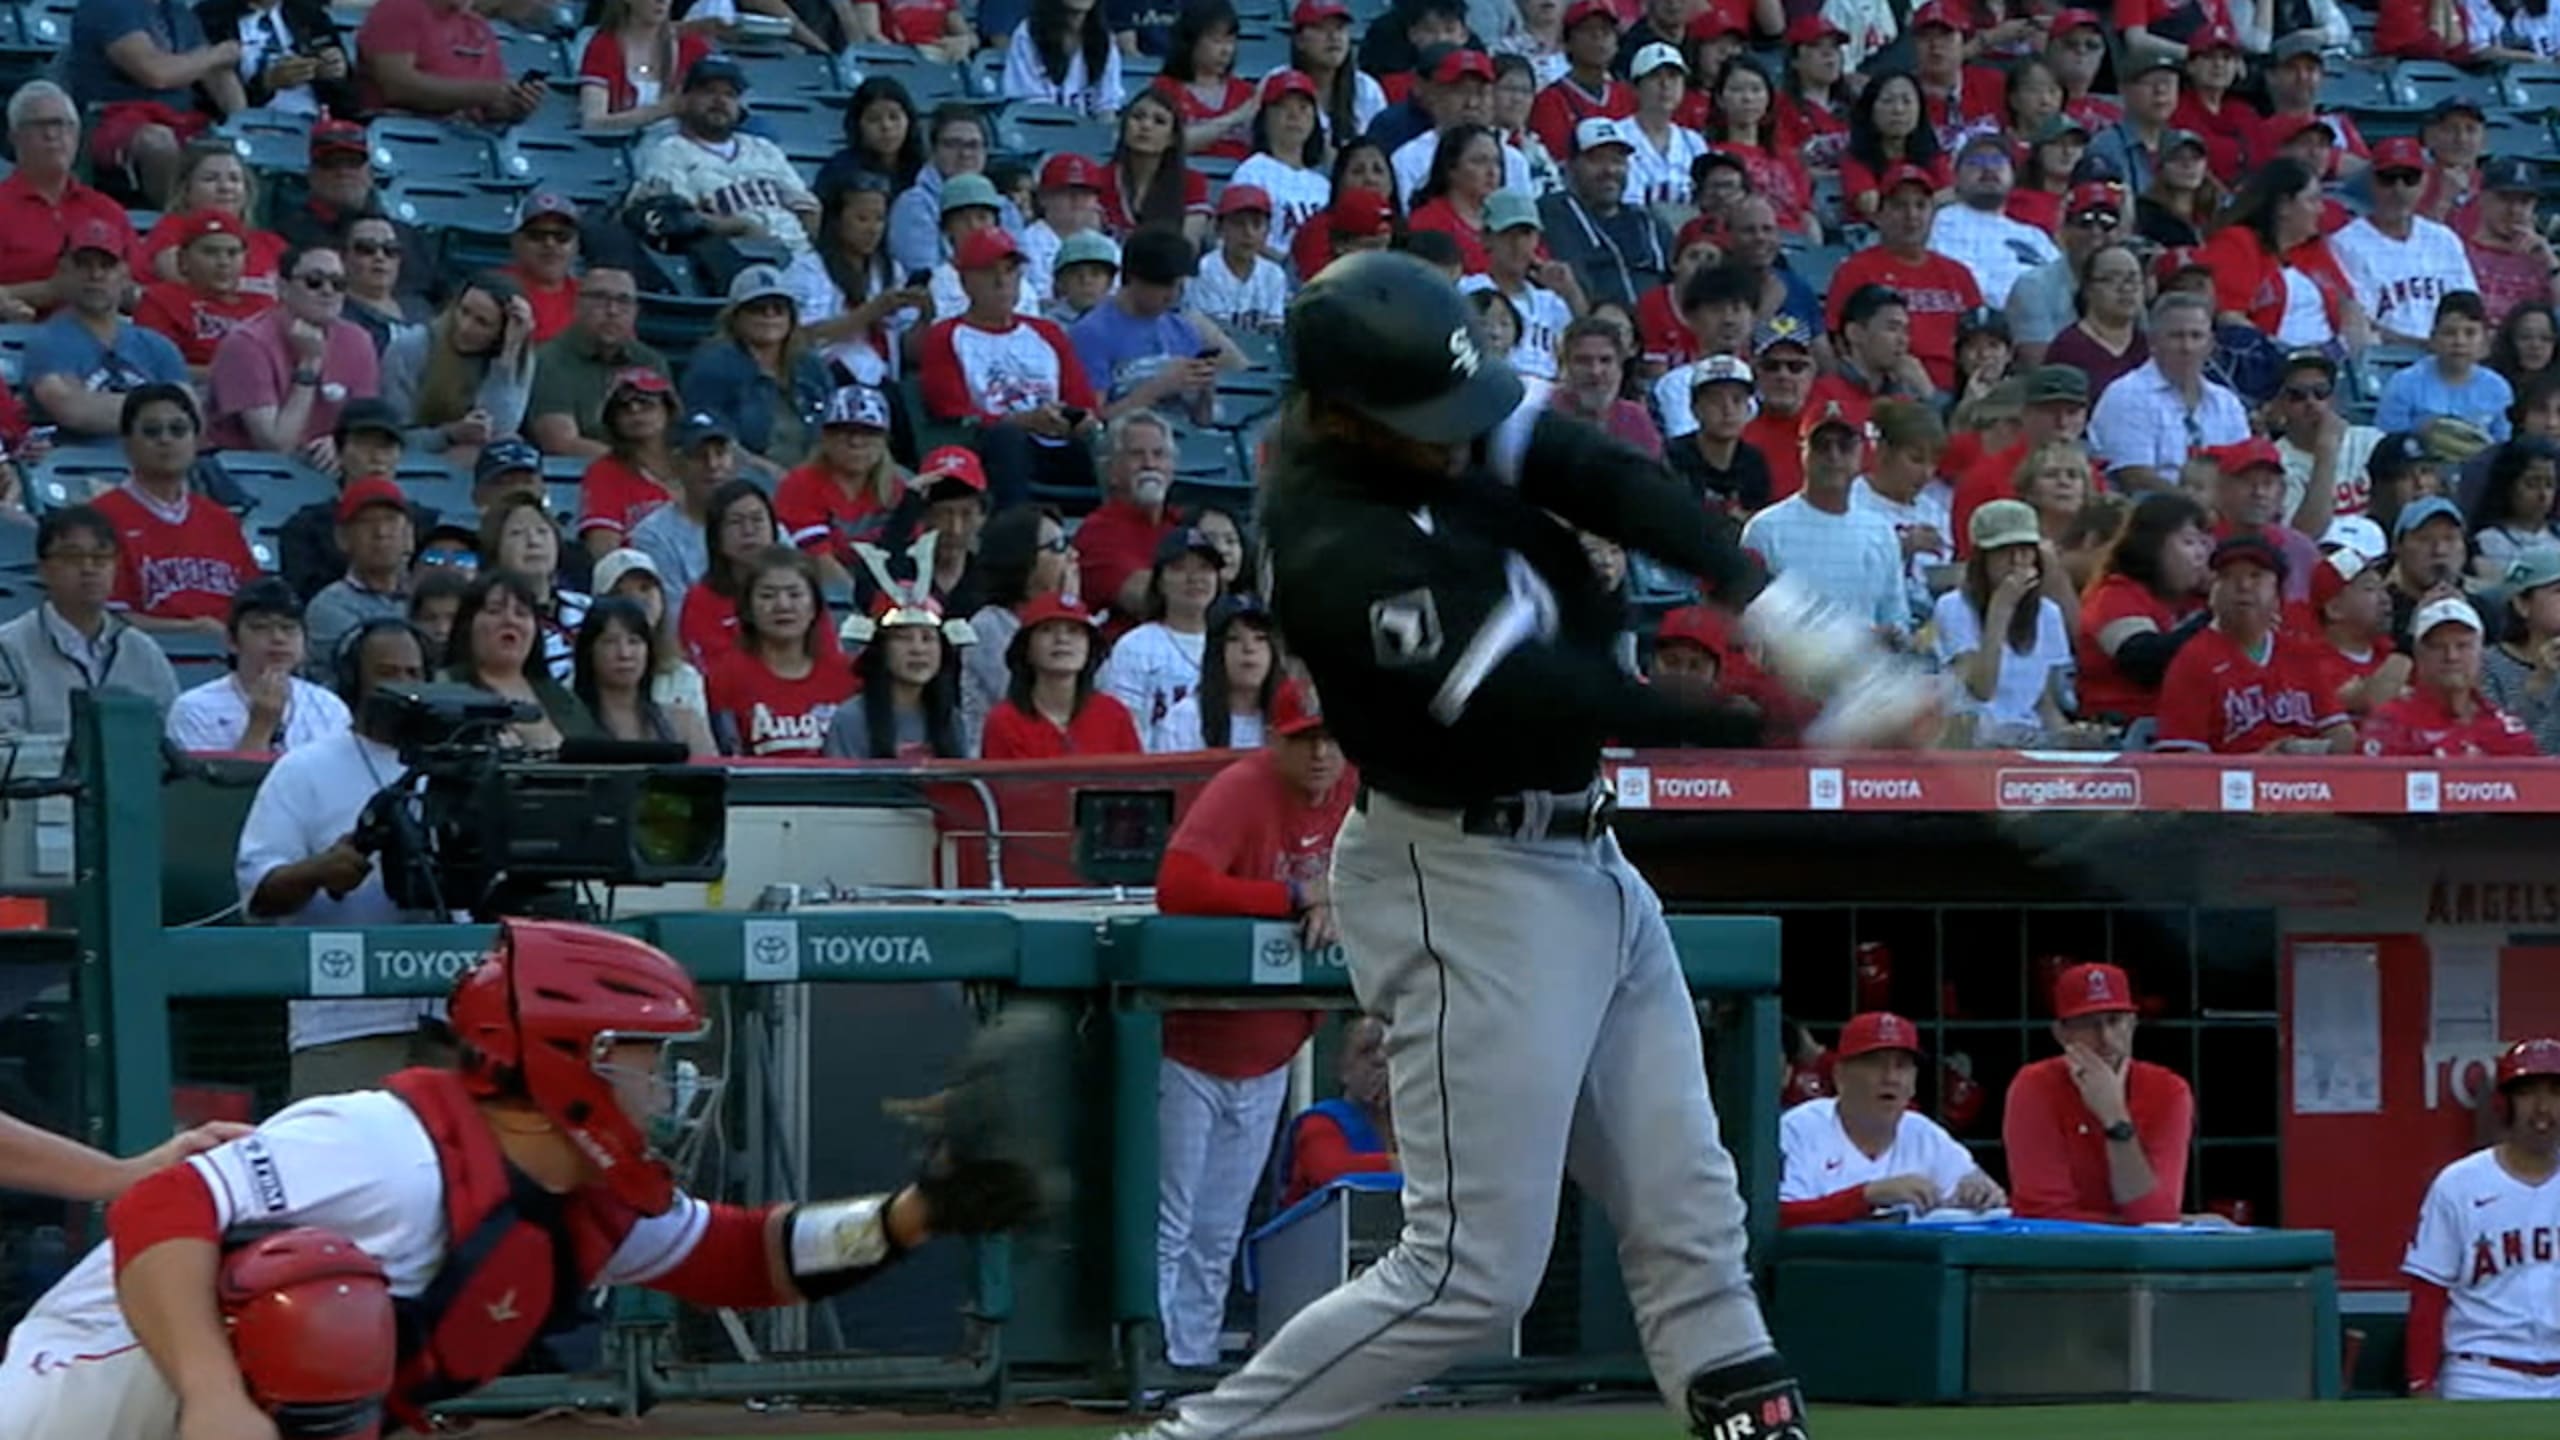 Zavala homers twice, drives in 4 runs as the White Sox beat the Angels 11-5  - CBS Los Angeles